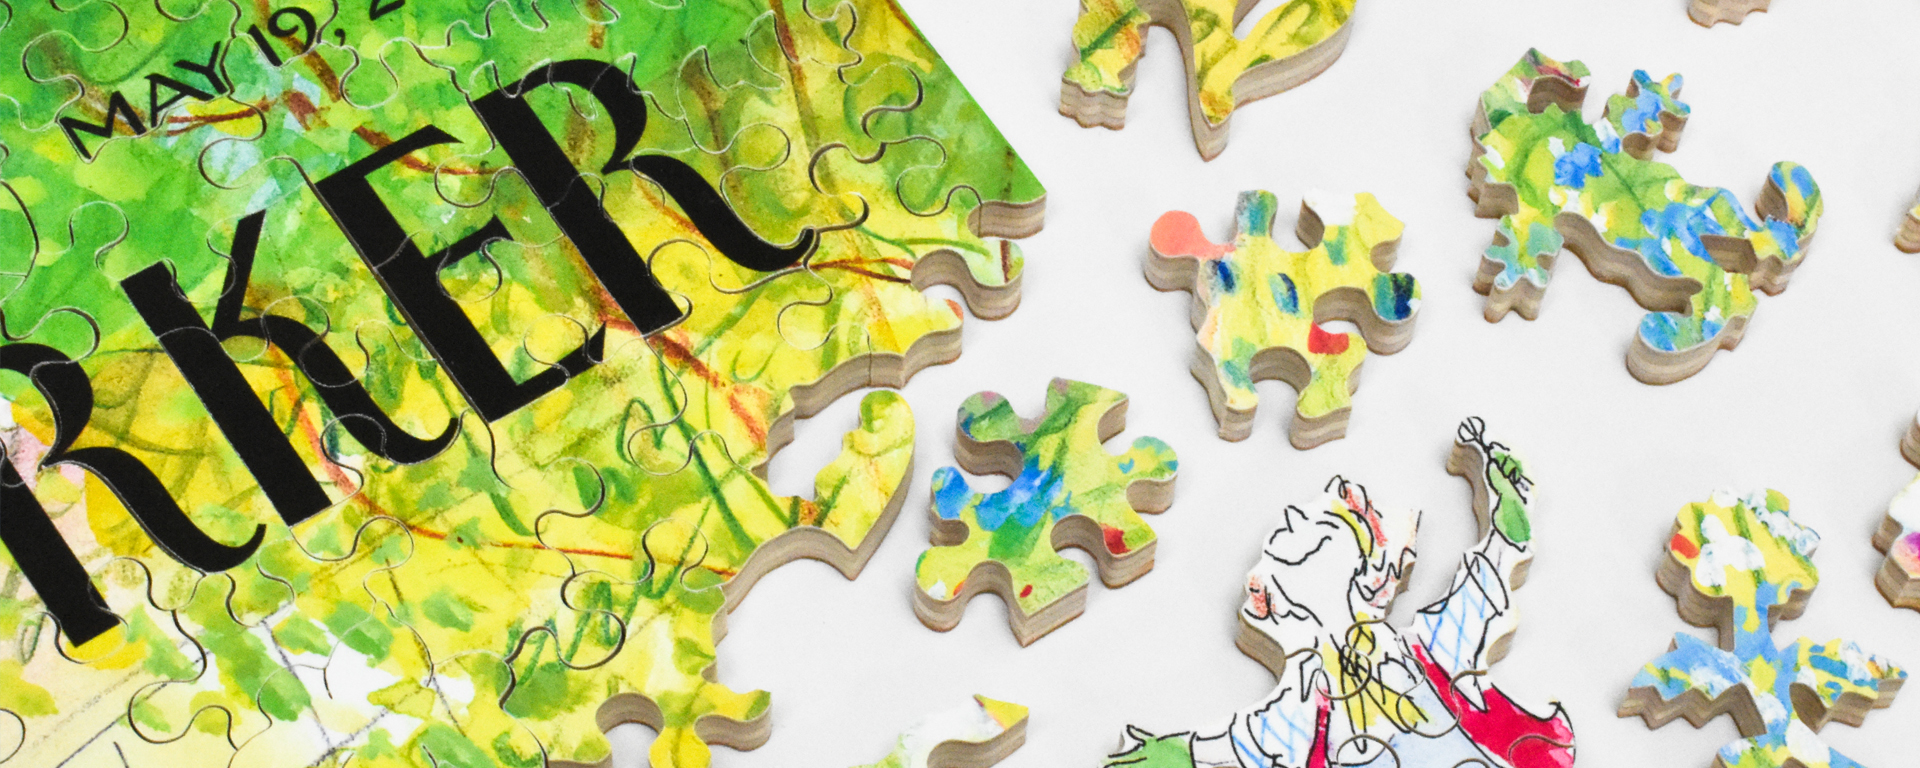 Wooden new yorker cover art puzzle in progress featuring a women with her arms outstreatched and wearing gardening gloves as well as colorful pieces in whimsical shapes such as flowers and the Stave logo.